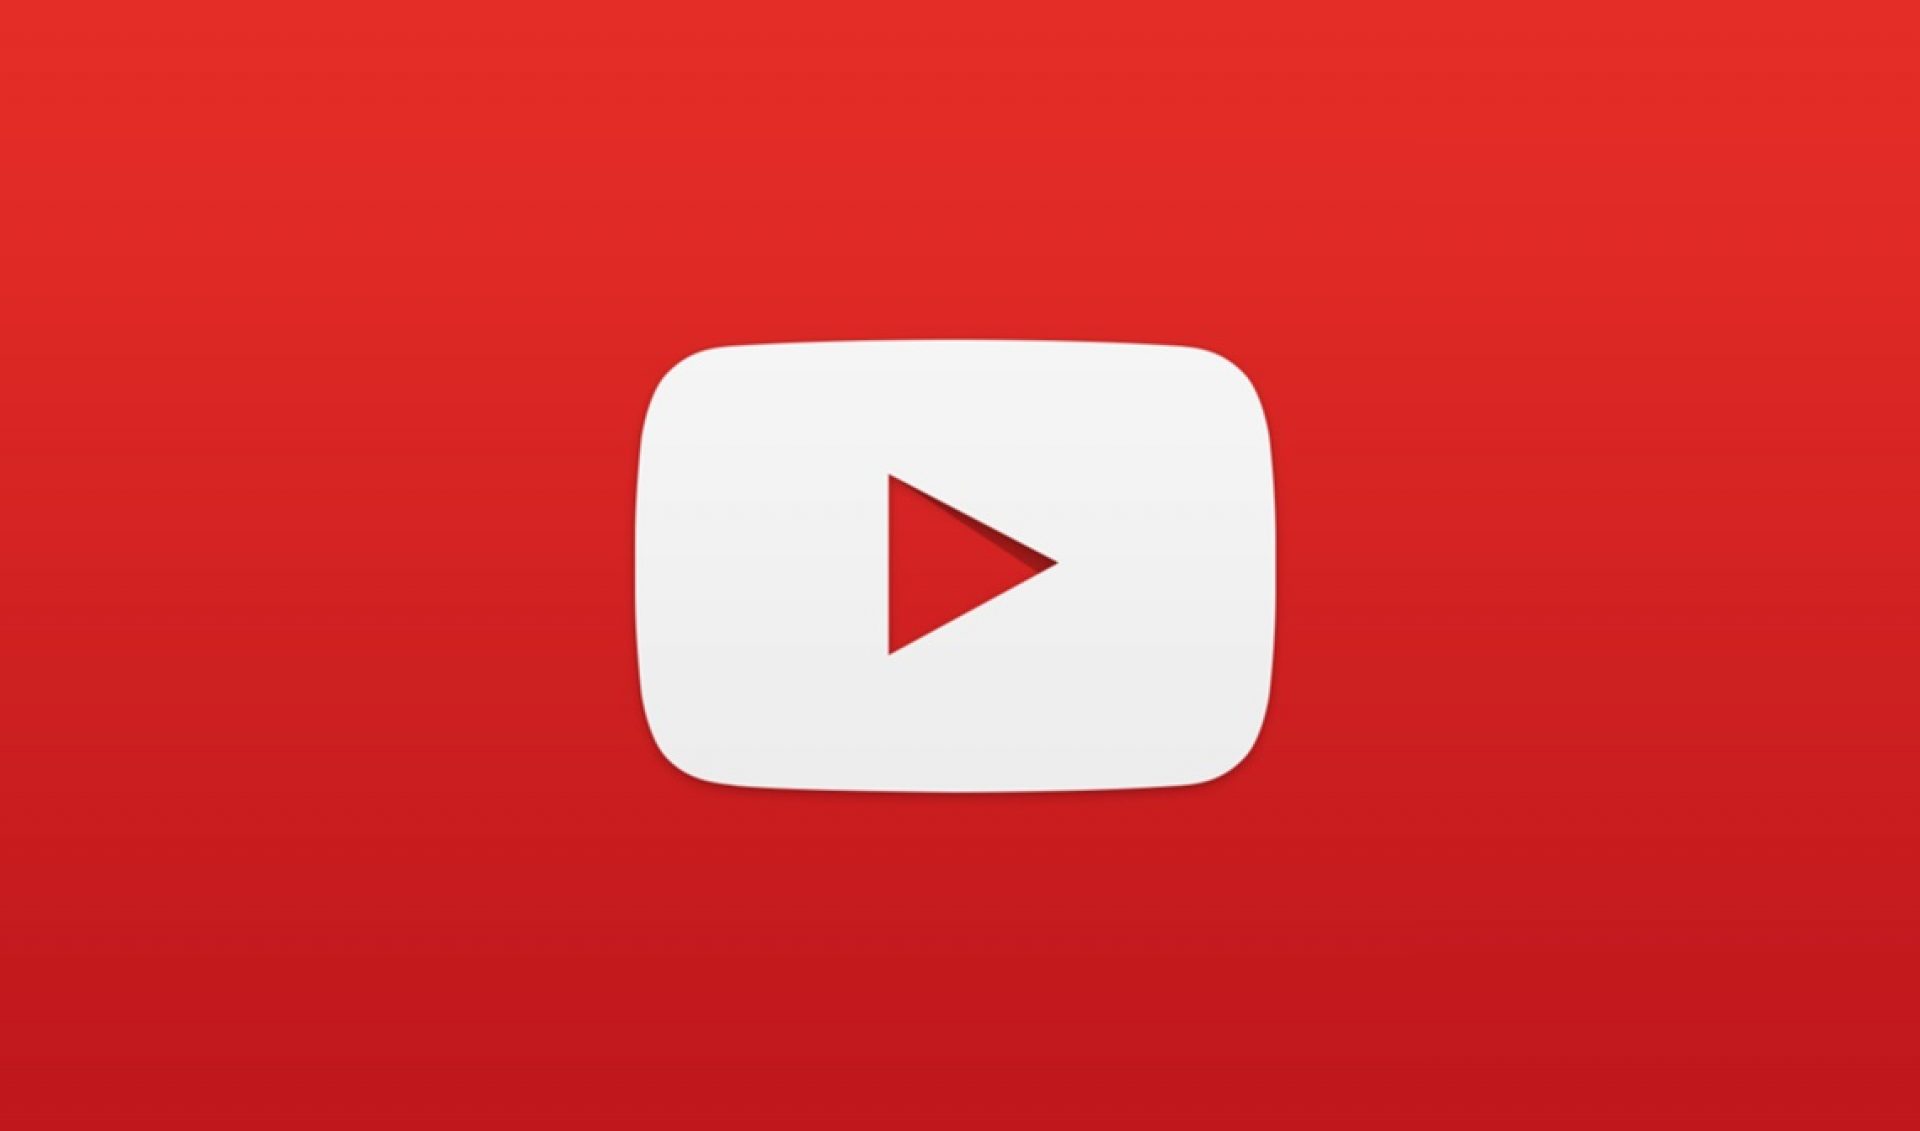 YouTube Is Piloting A Feature That Displays Concurrent Views In Real-Time